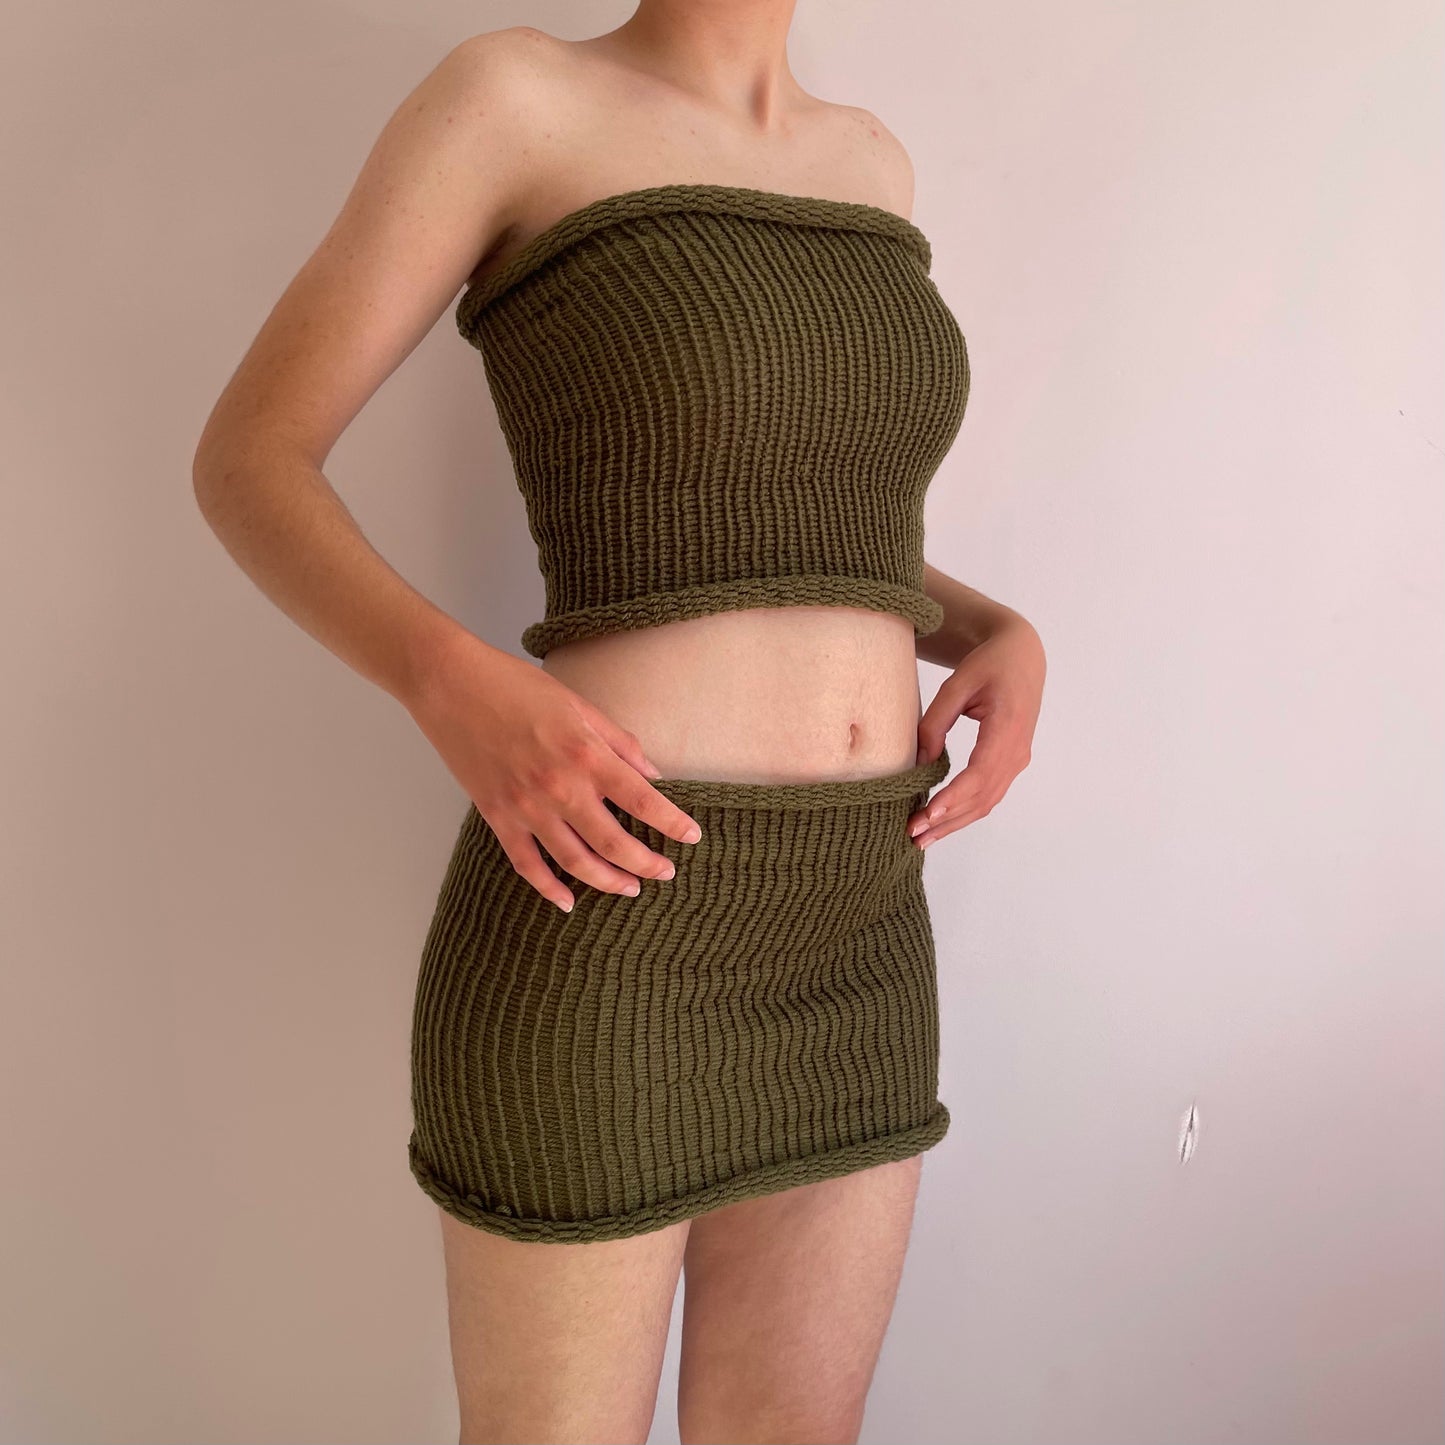 SET: Handmade knitted bandeau top and skirt in khaki green